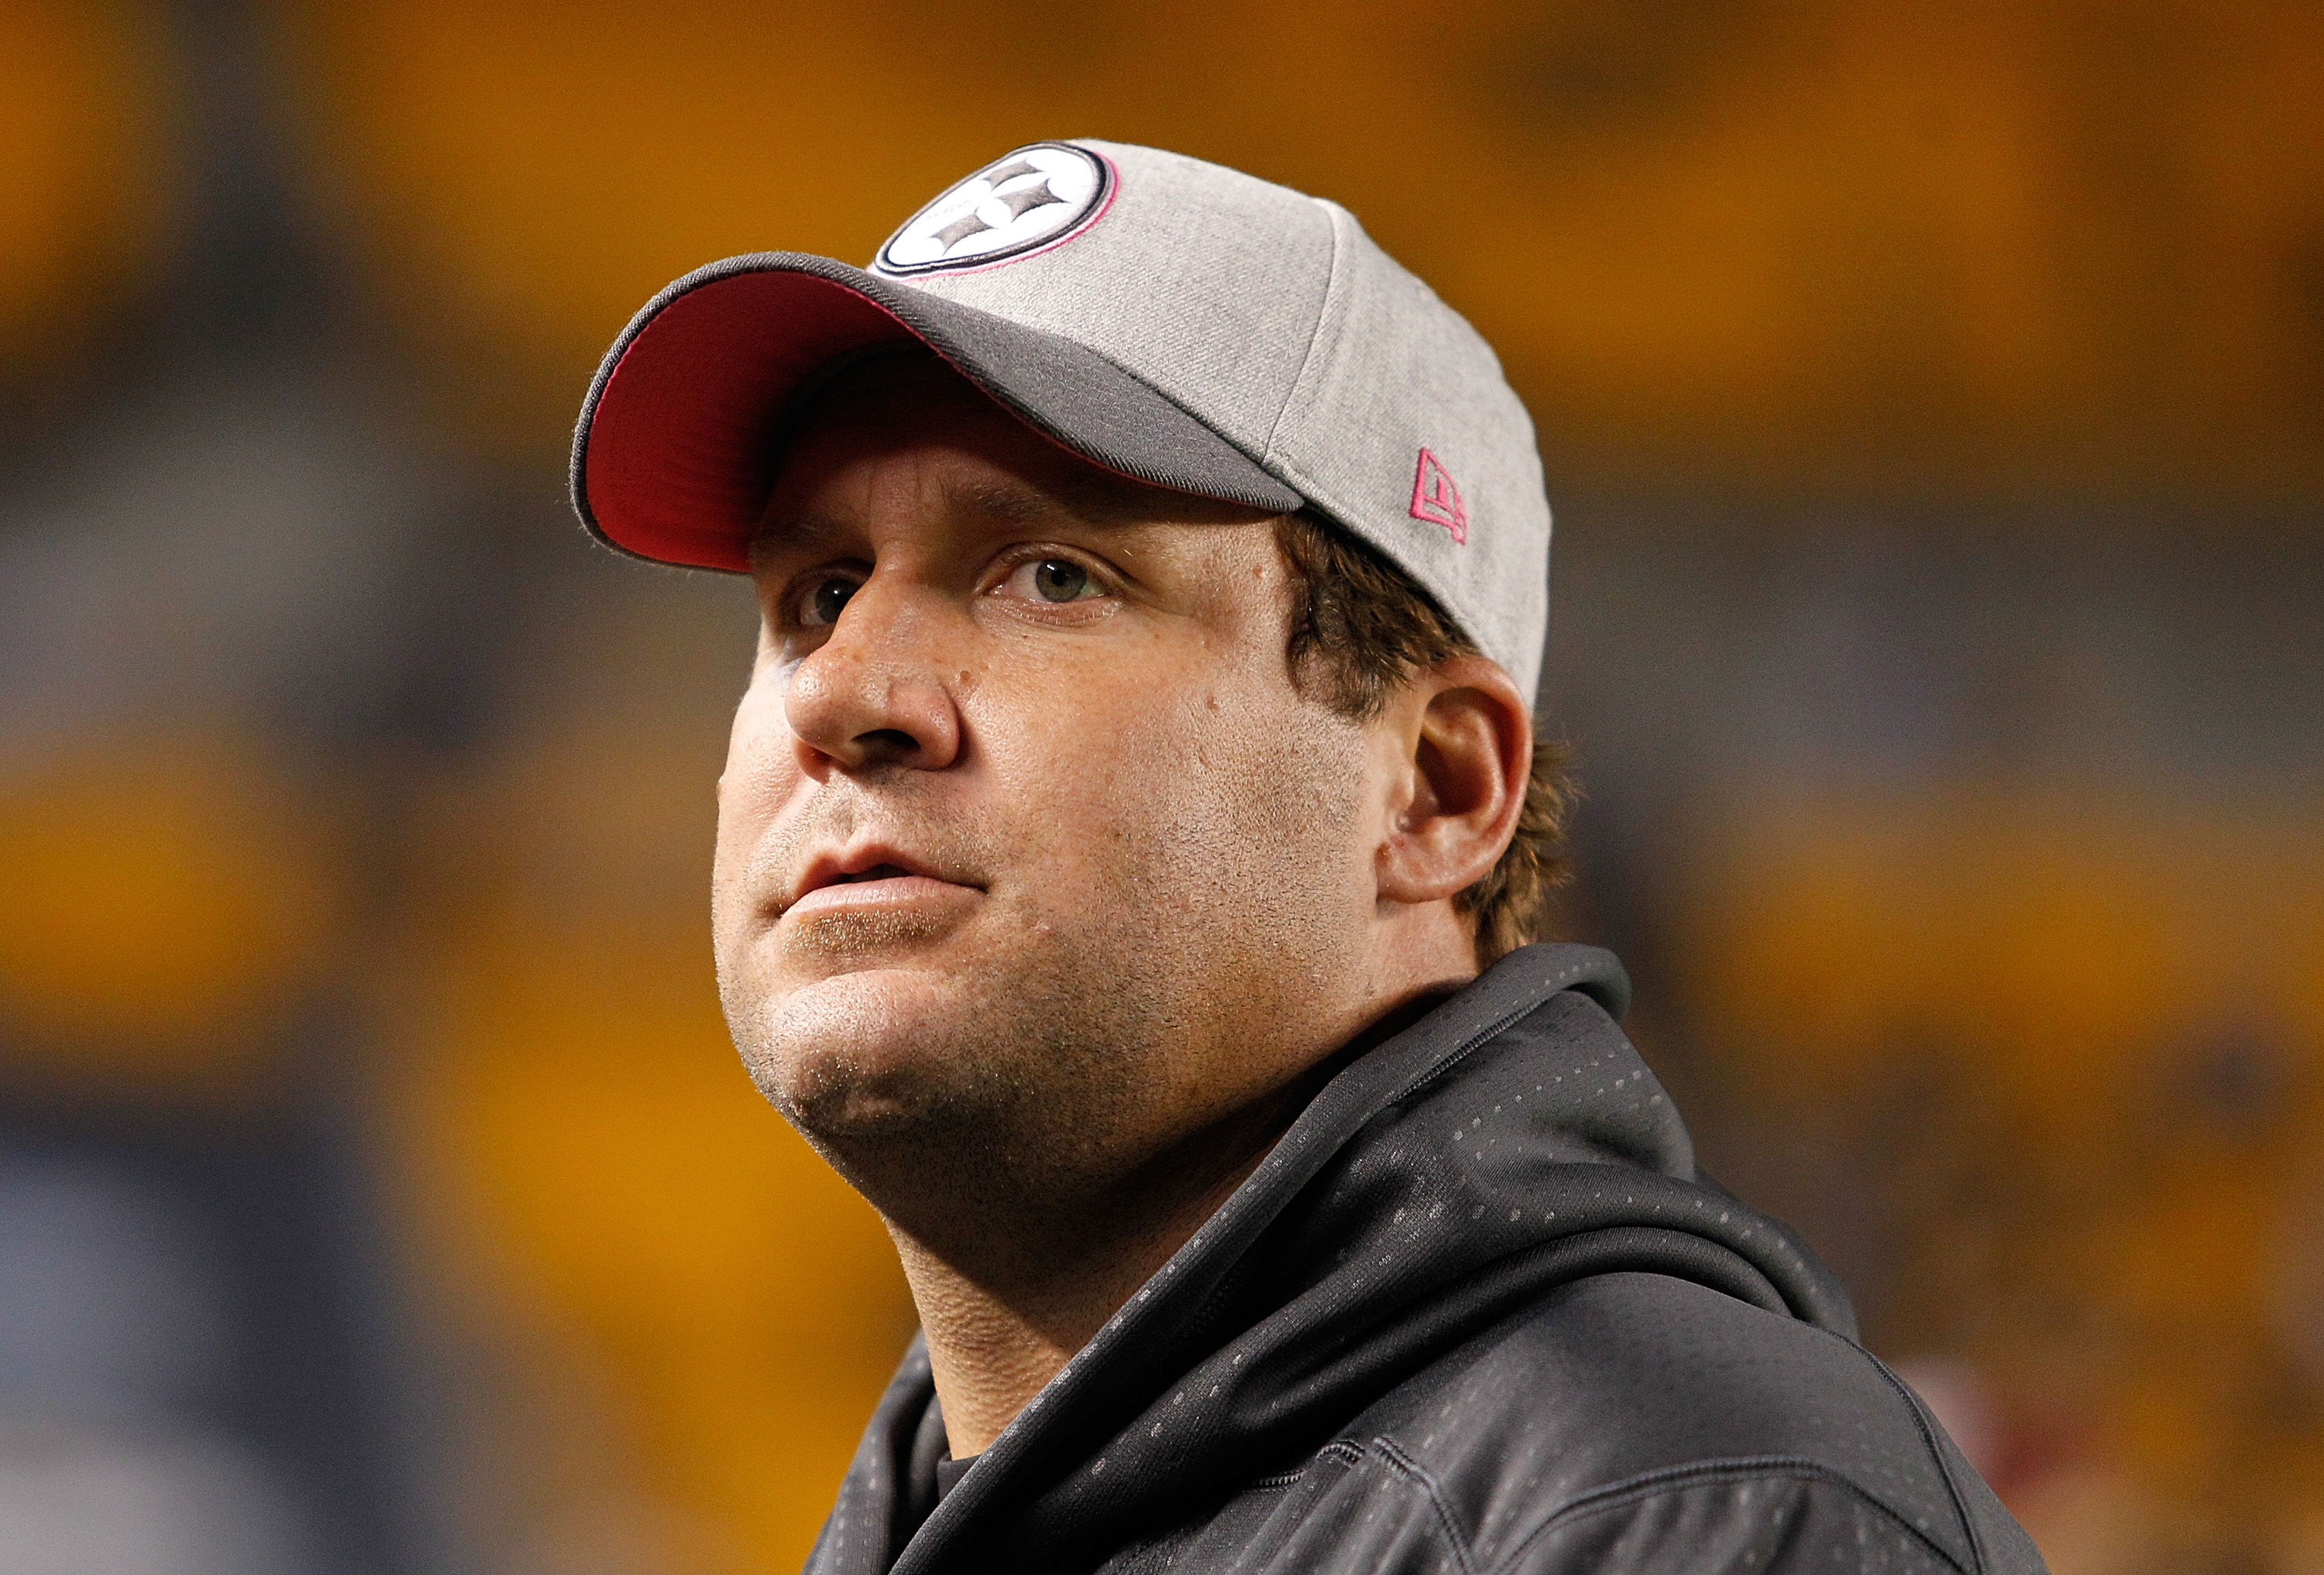 Ben Roethlisberger can only watch as his team struggles (Getty)